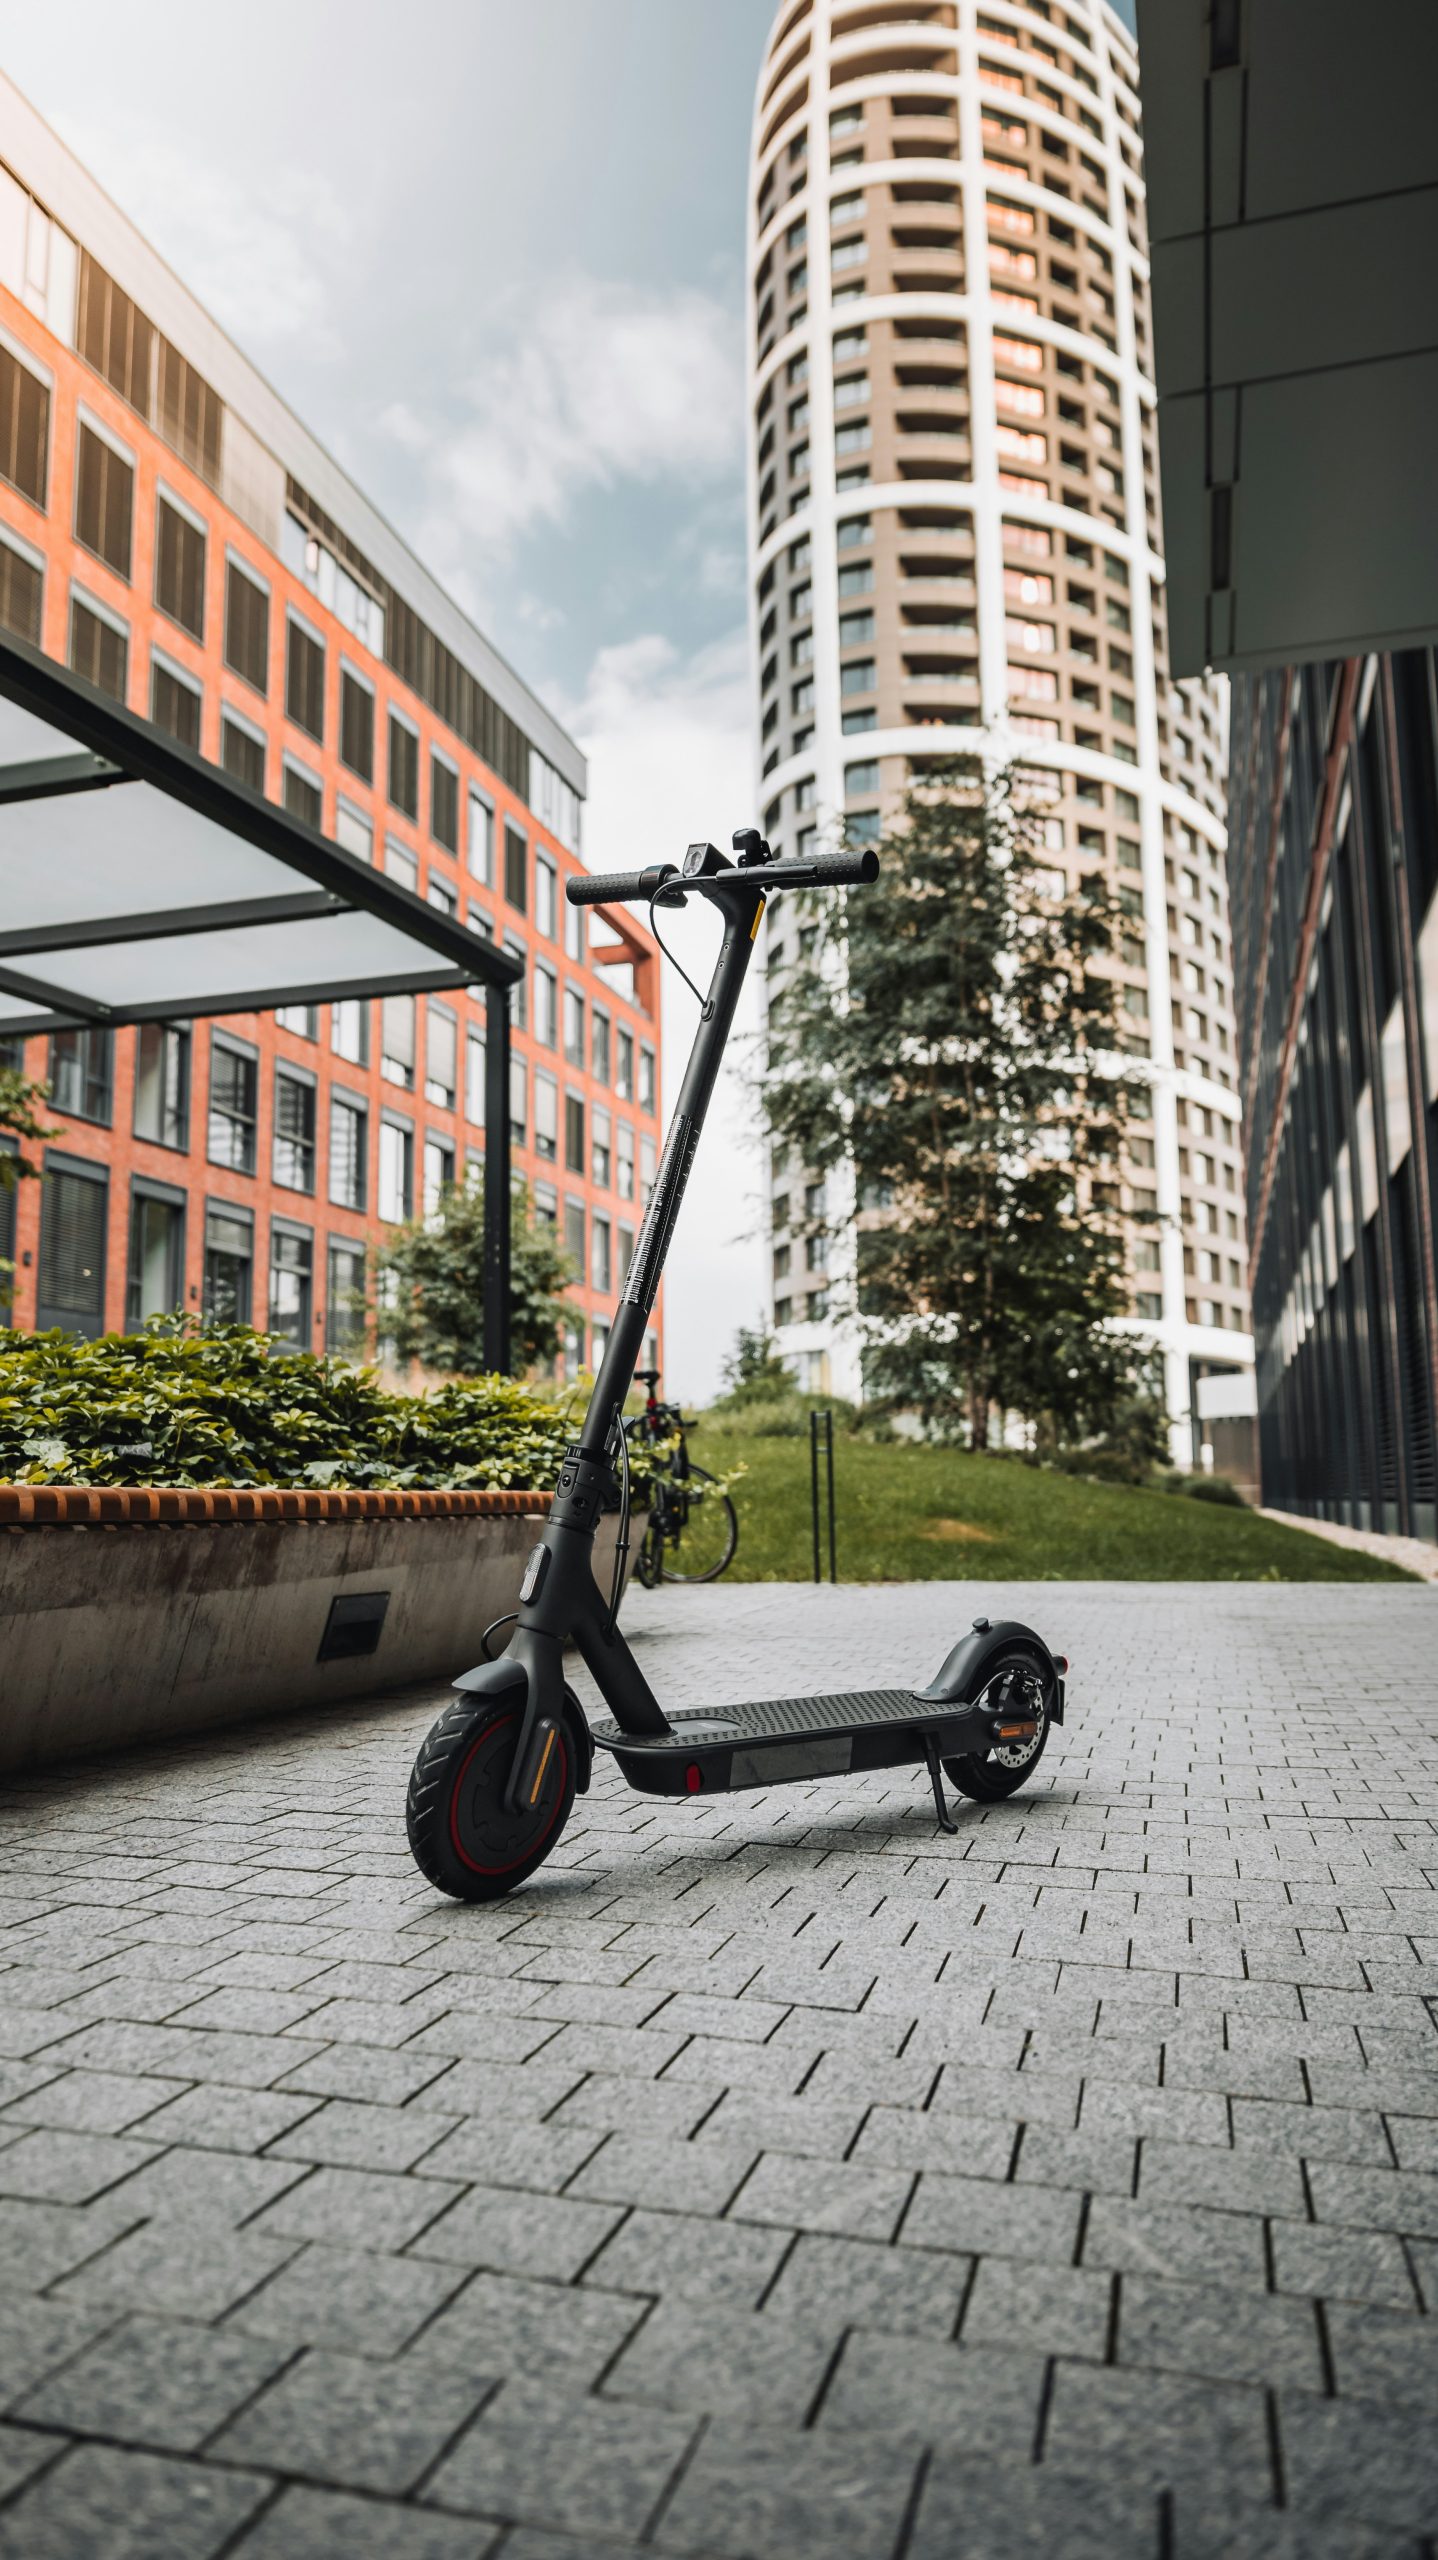 How Do Electric Scooters Compare To Traditional Scooters?